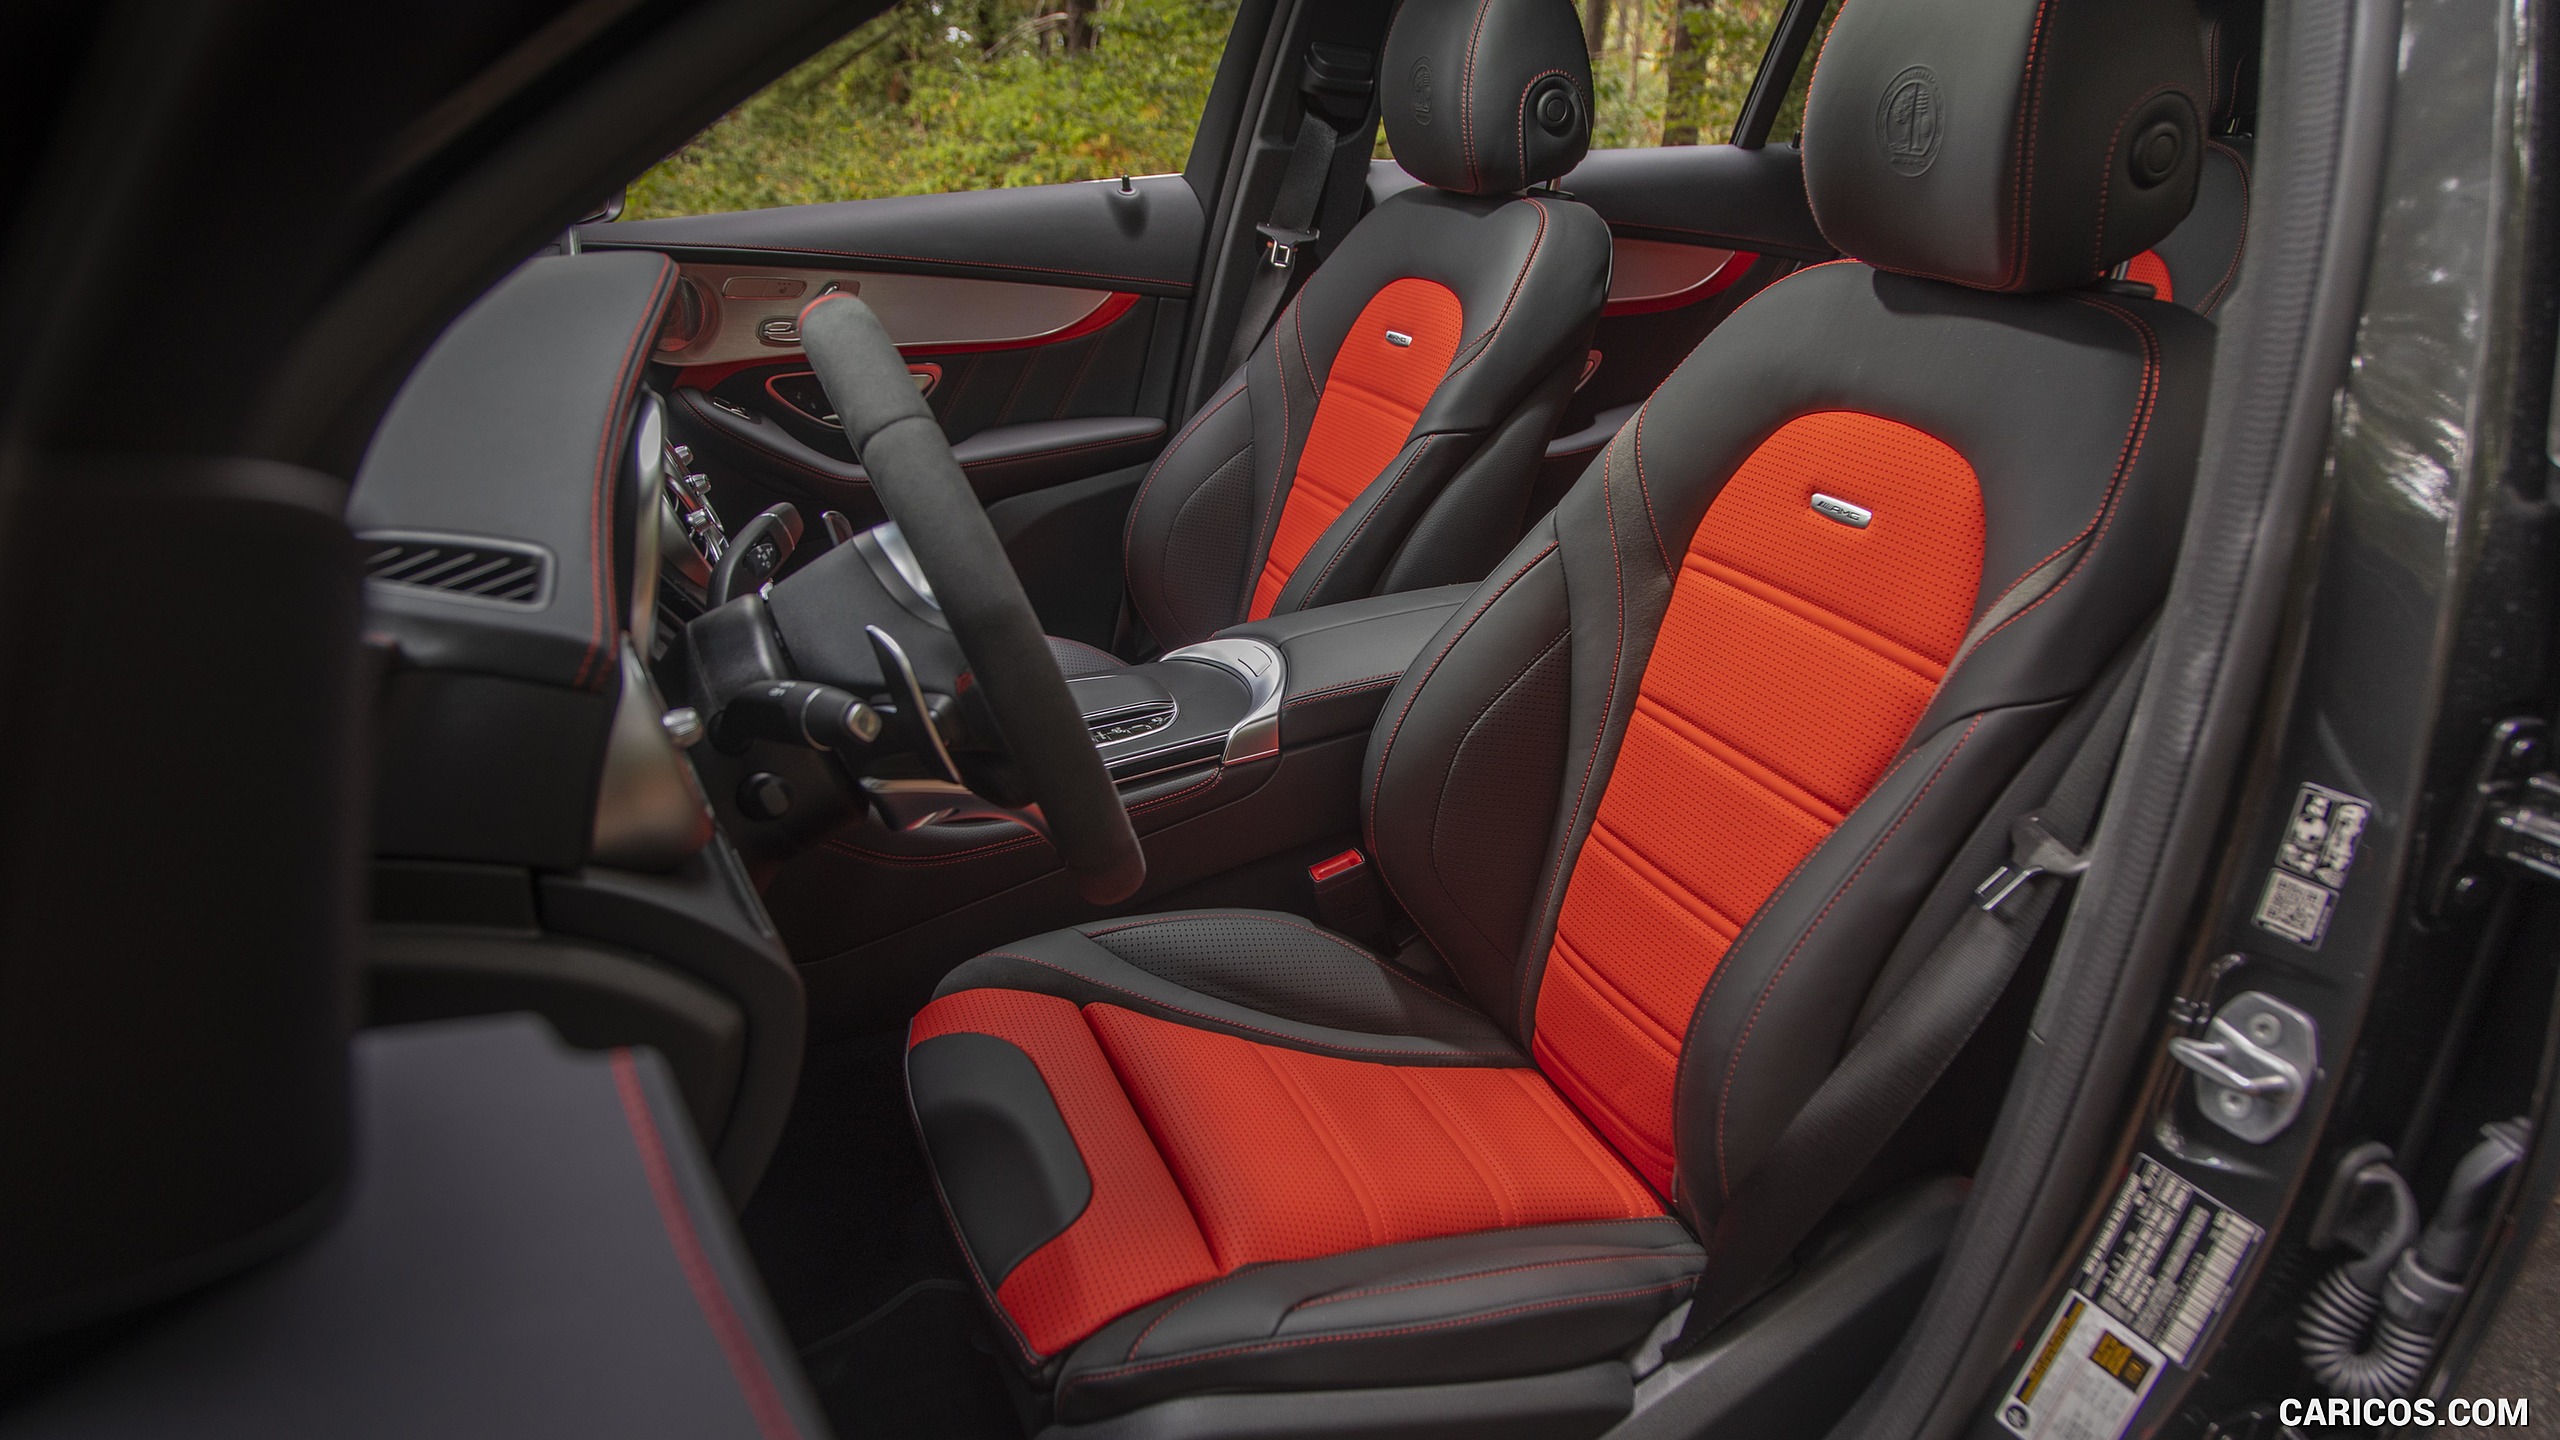 2020 Mercedes-AMG GLC 63 S Coupe (US-Spec) - Interior, Front Seats, #100 of 102